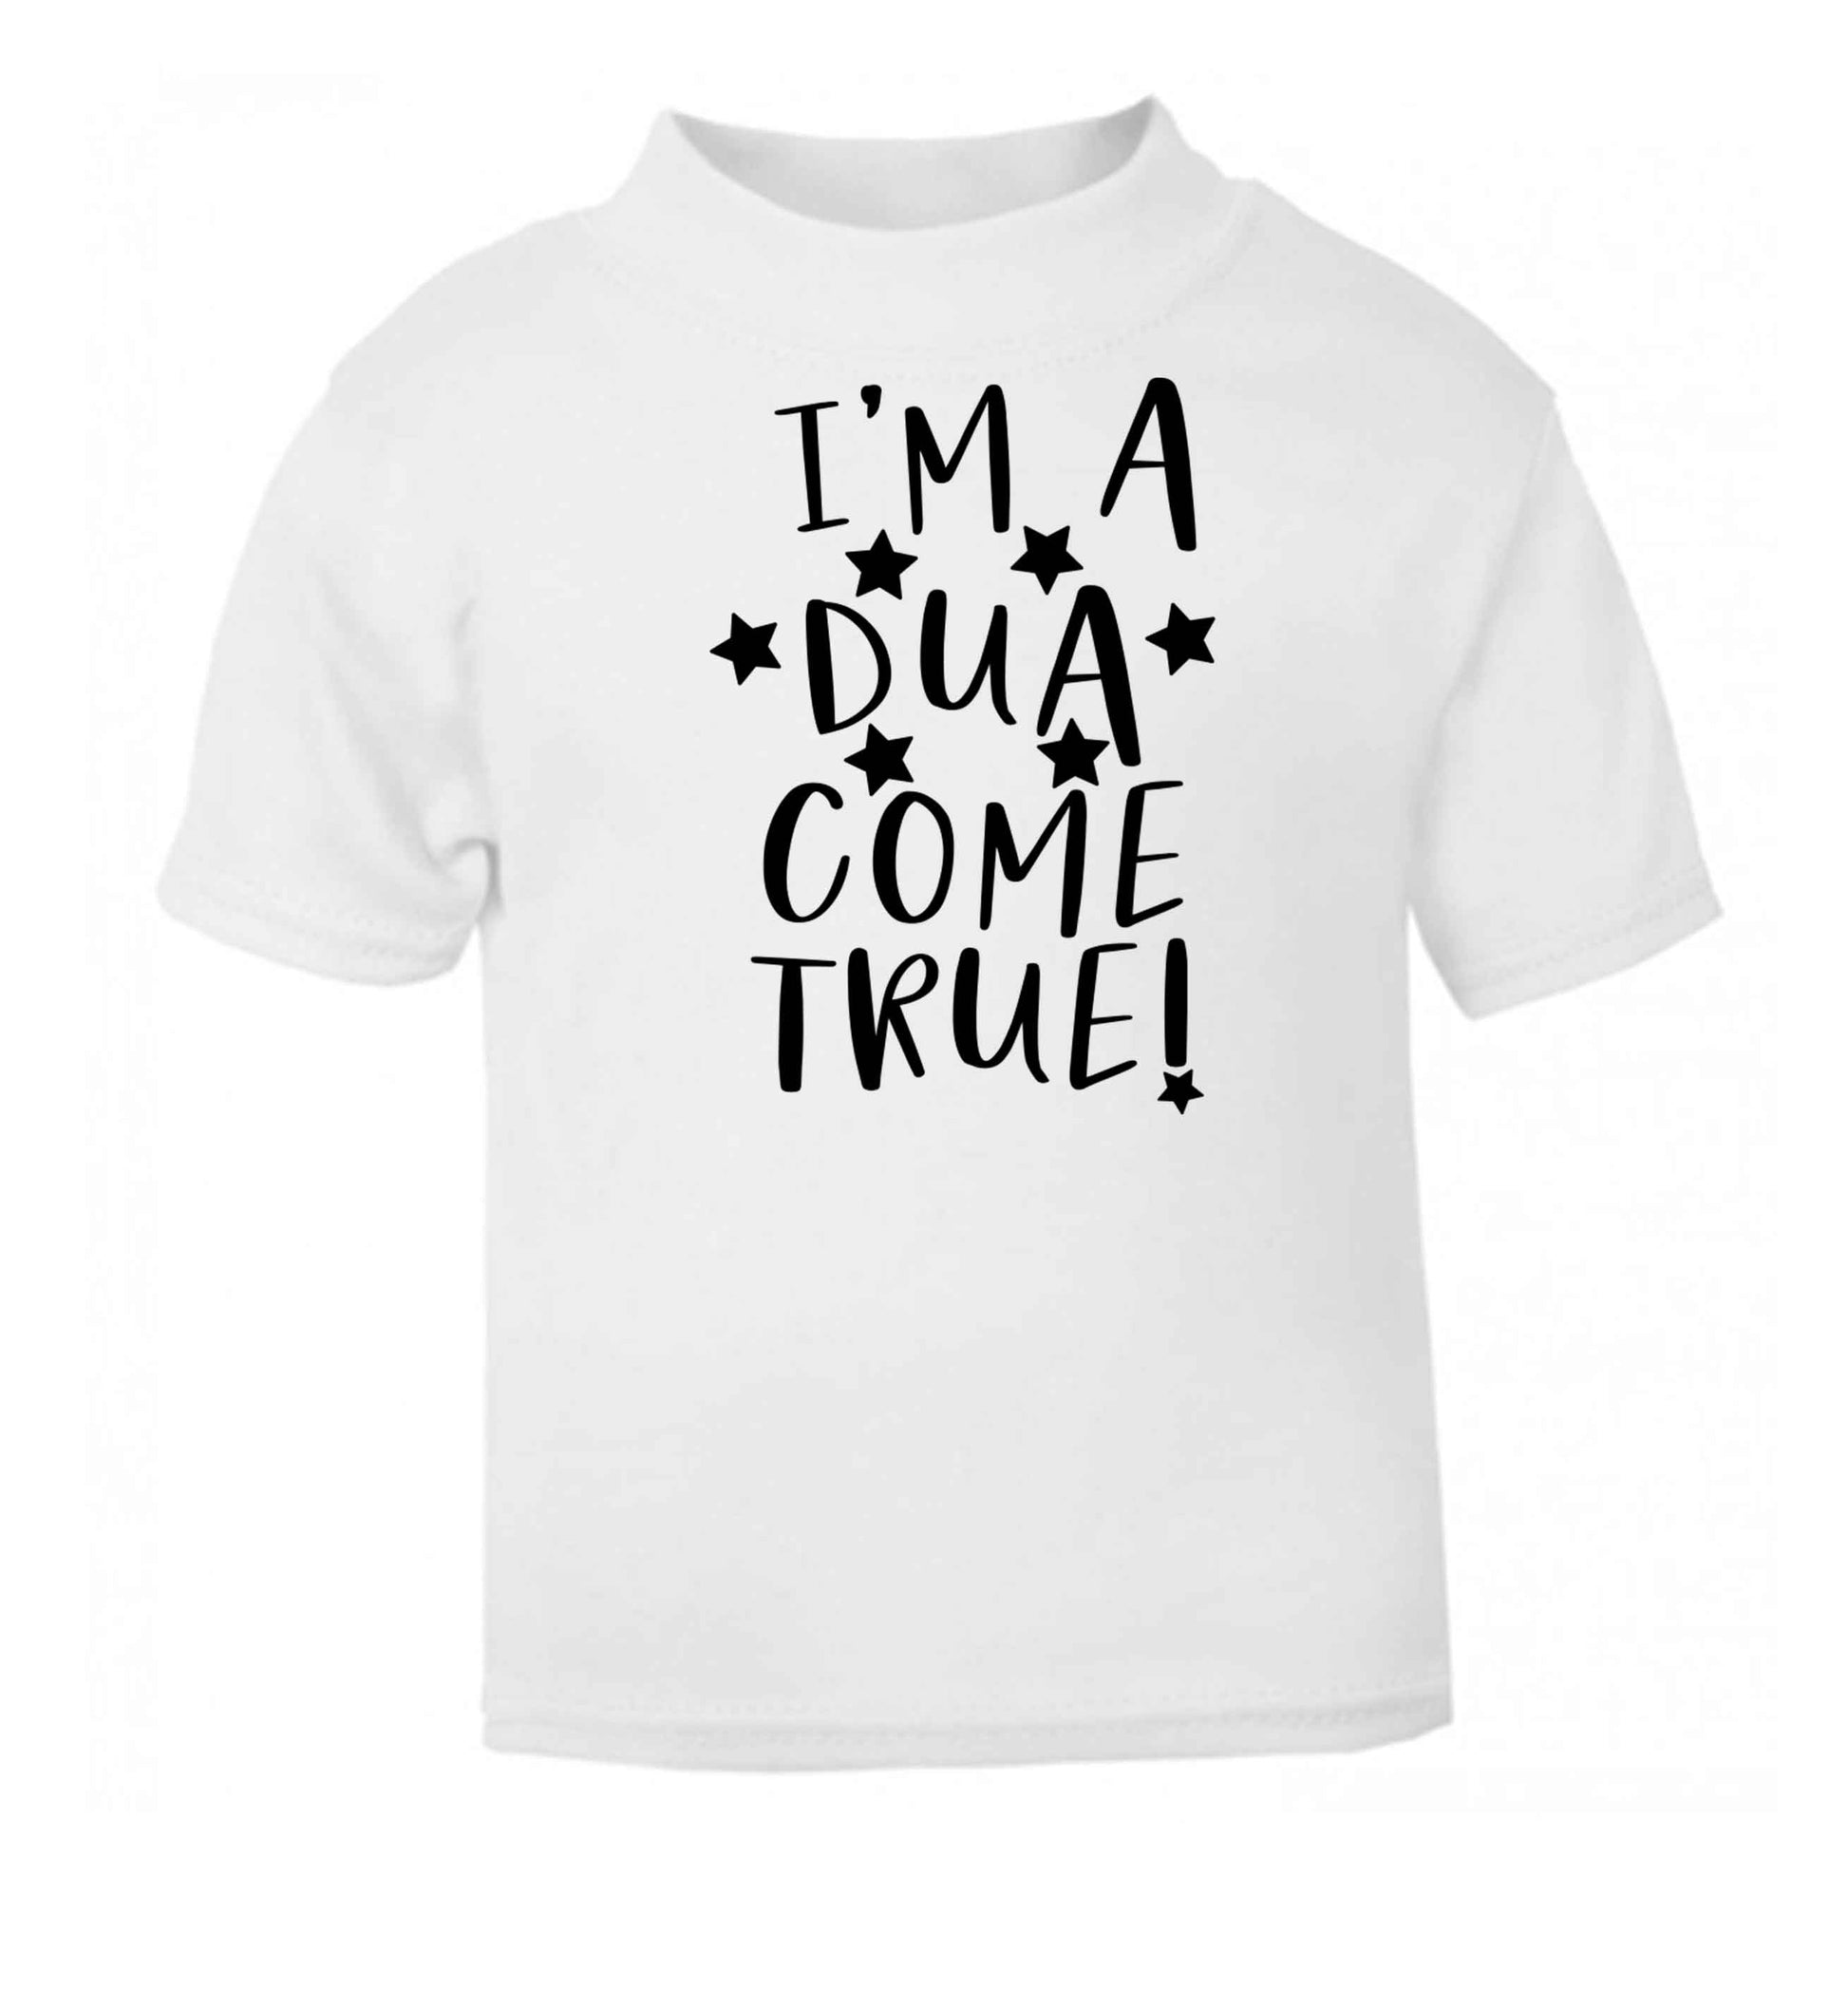 I'm a dua come true white baby toddler Tshirt 2 Years